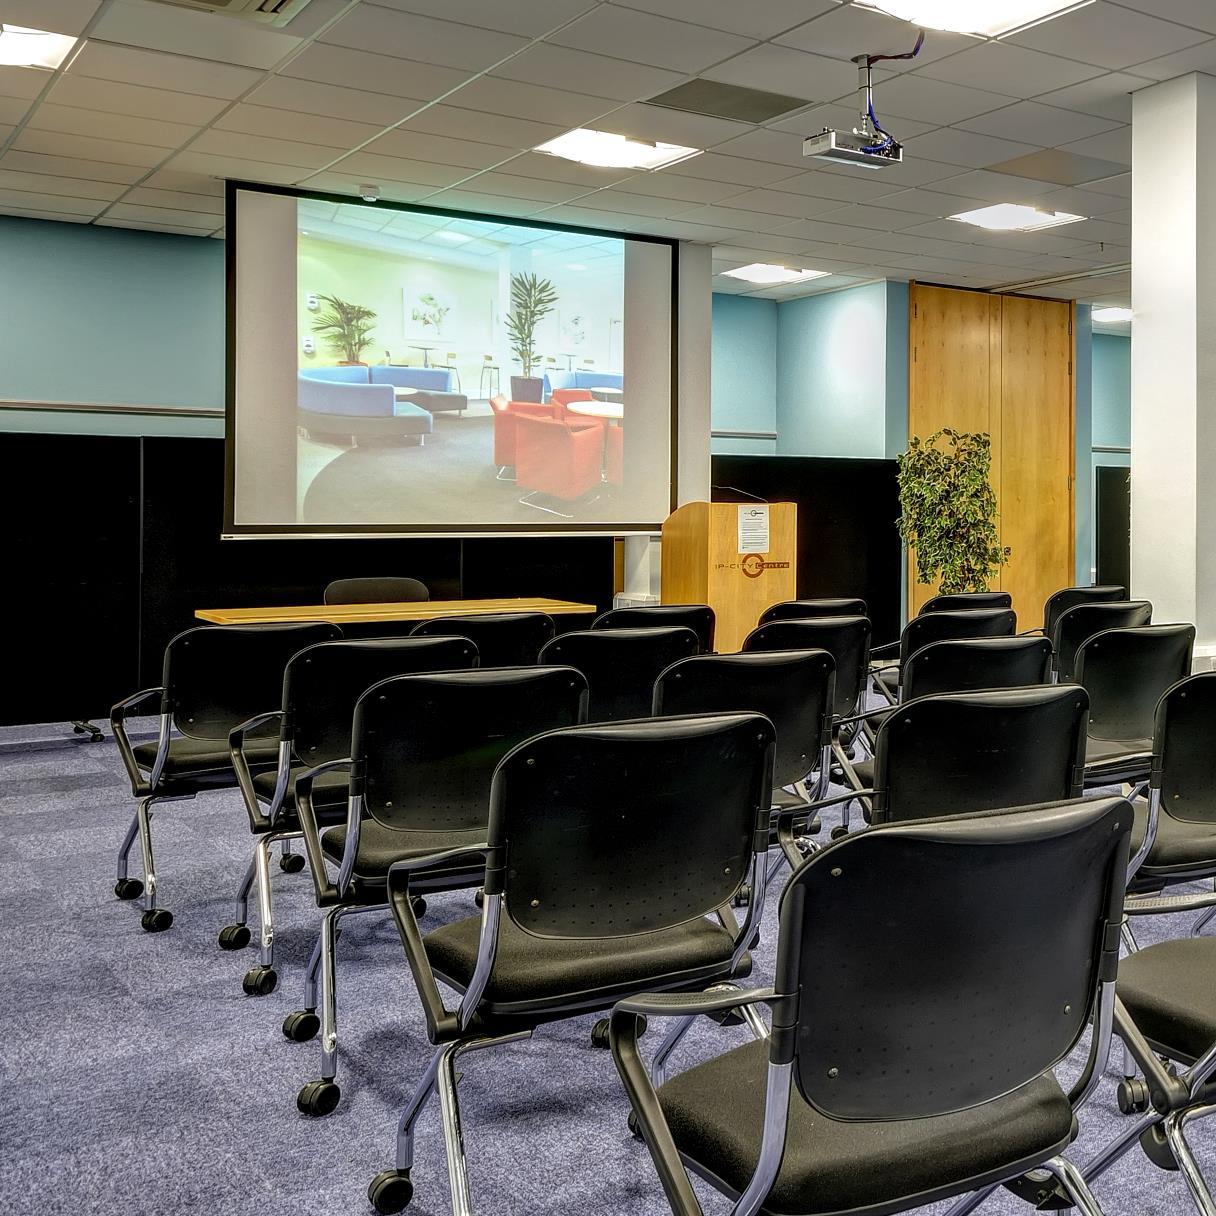 Located on the vibrant Ipswich waterfront, IP-City Centre is a modern conference venue with flexible facilities and office accommodation. http://t.co/eRshugKj0G